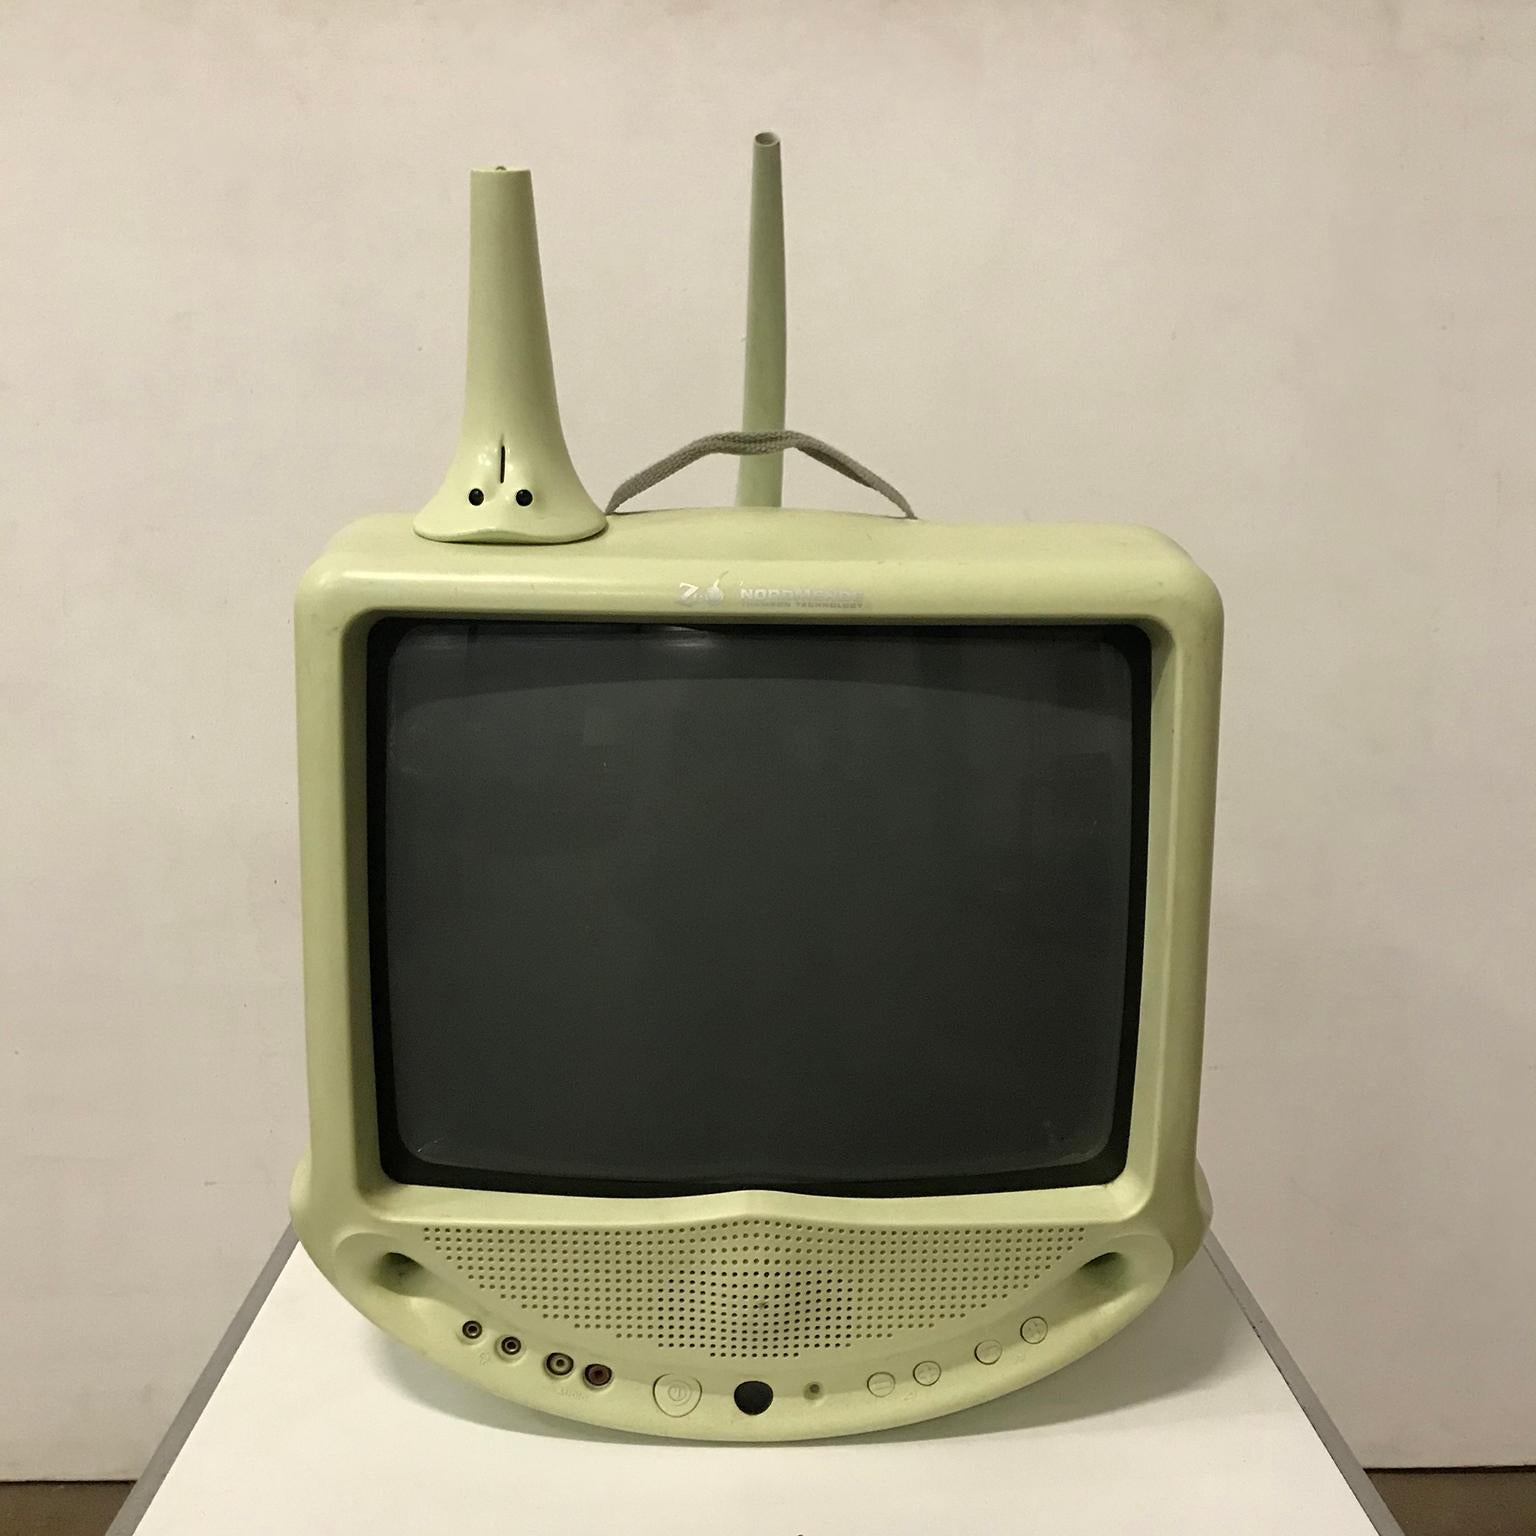 Portable Nordmende television by Thomson Technology with remote control in pastel pistache. Very charming design. The set is functioning. The television is portable by a handle/band. This portable TV set raises numerous interesting points due to its